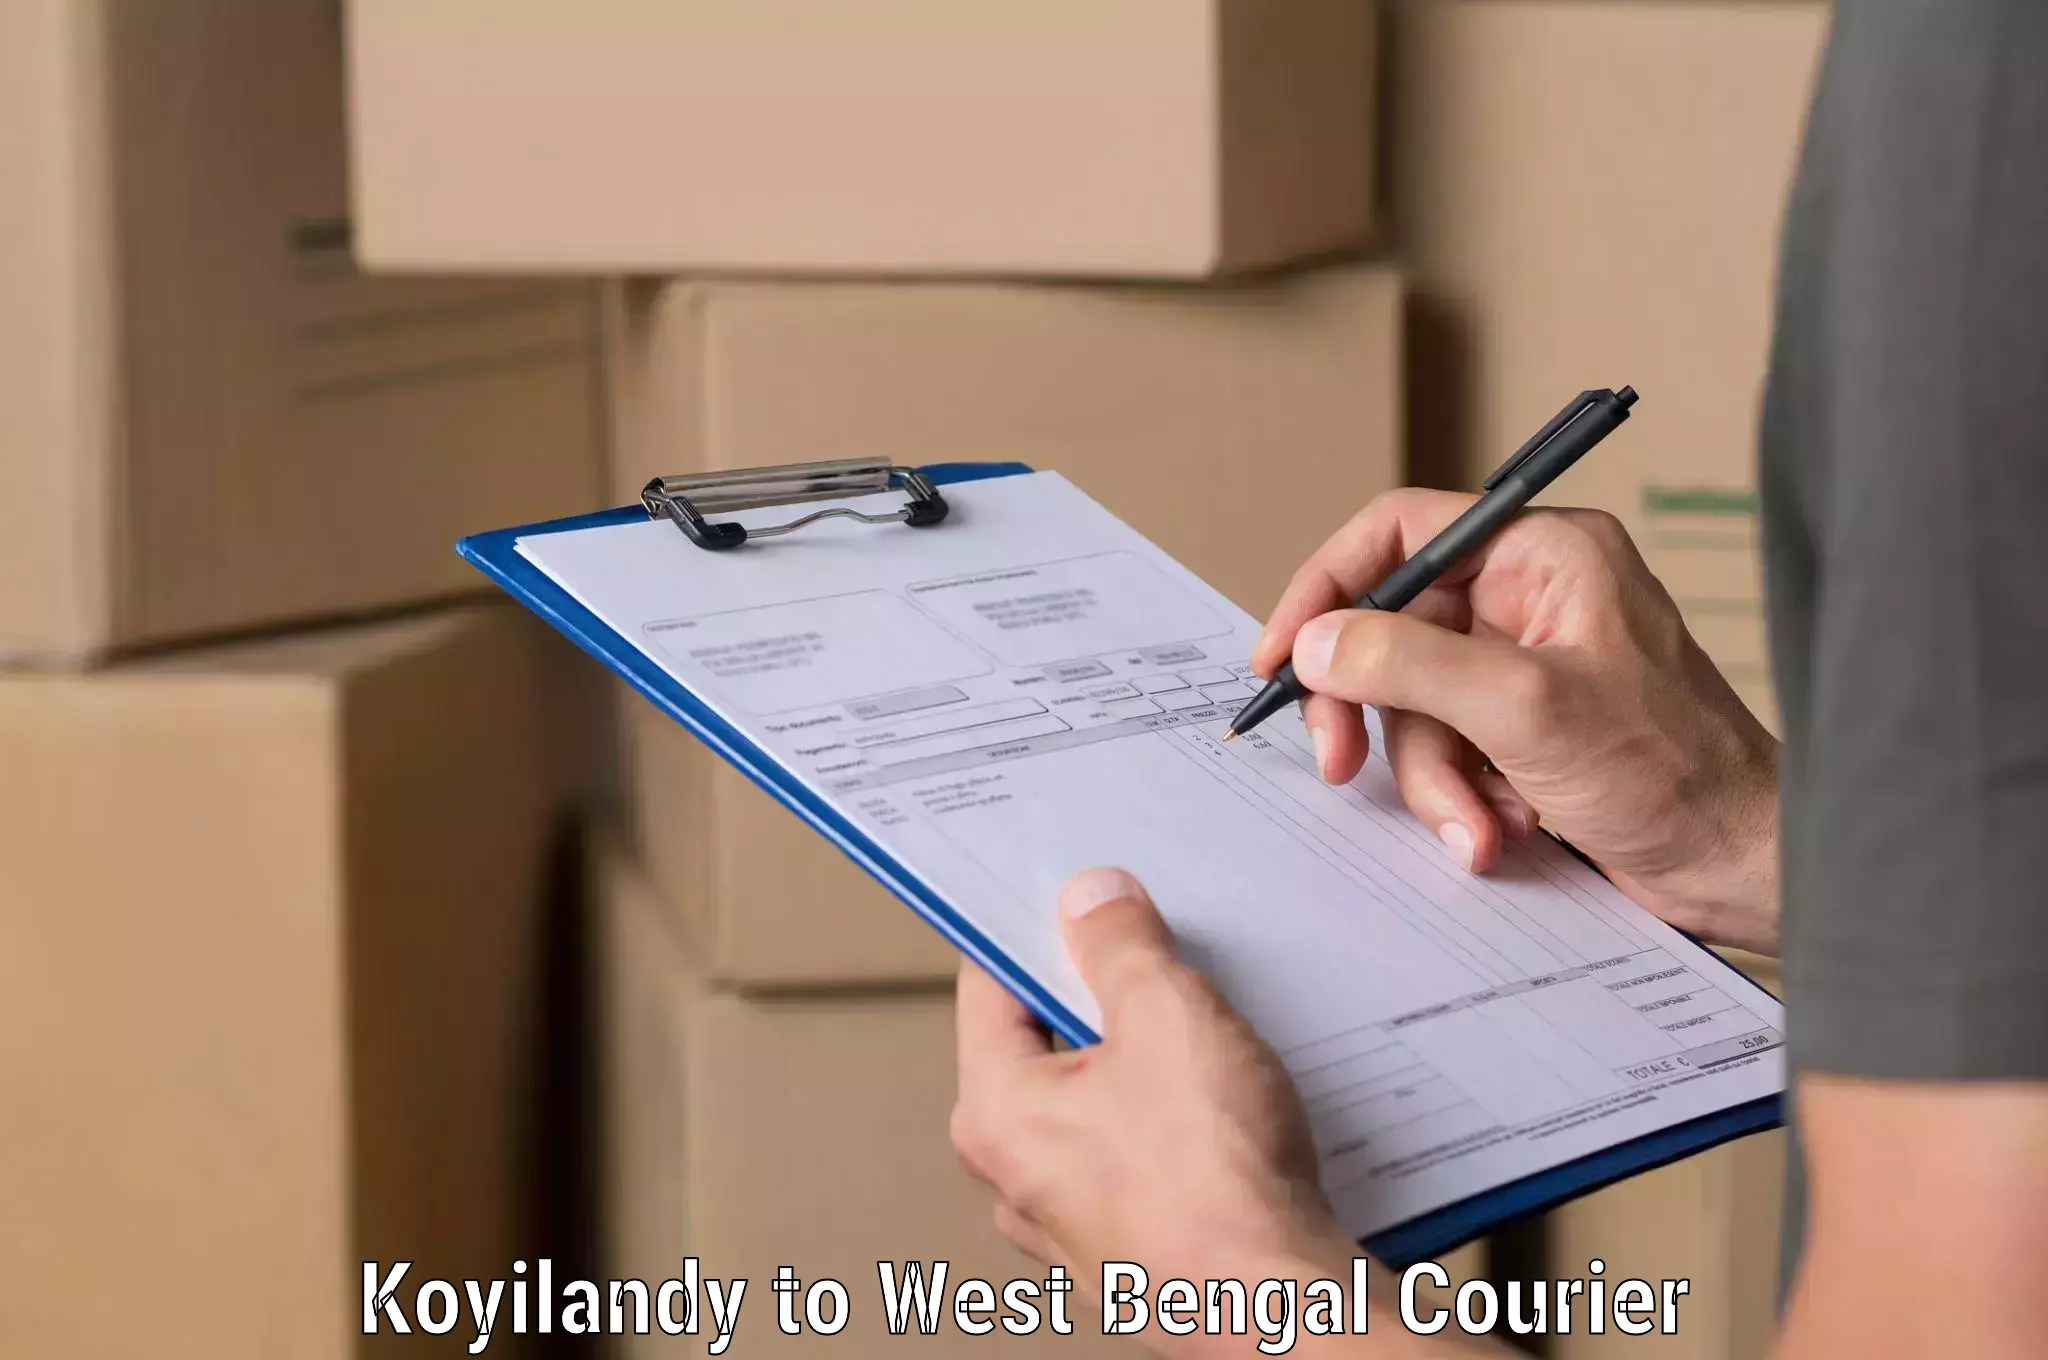 Courier service innovation Koyilandy to West Bengal